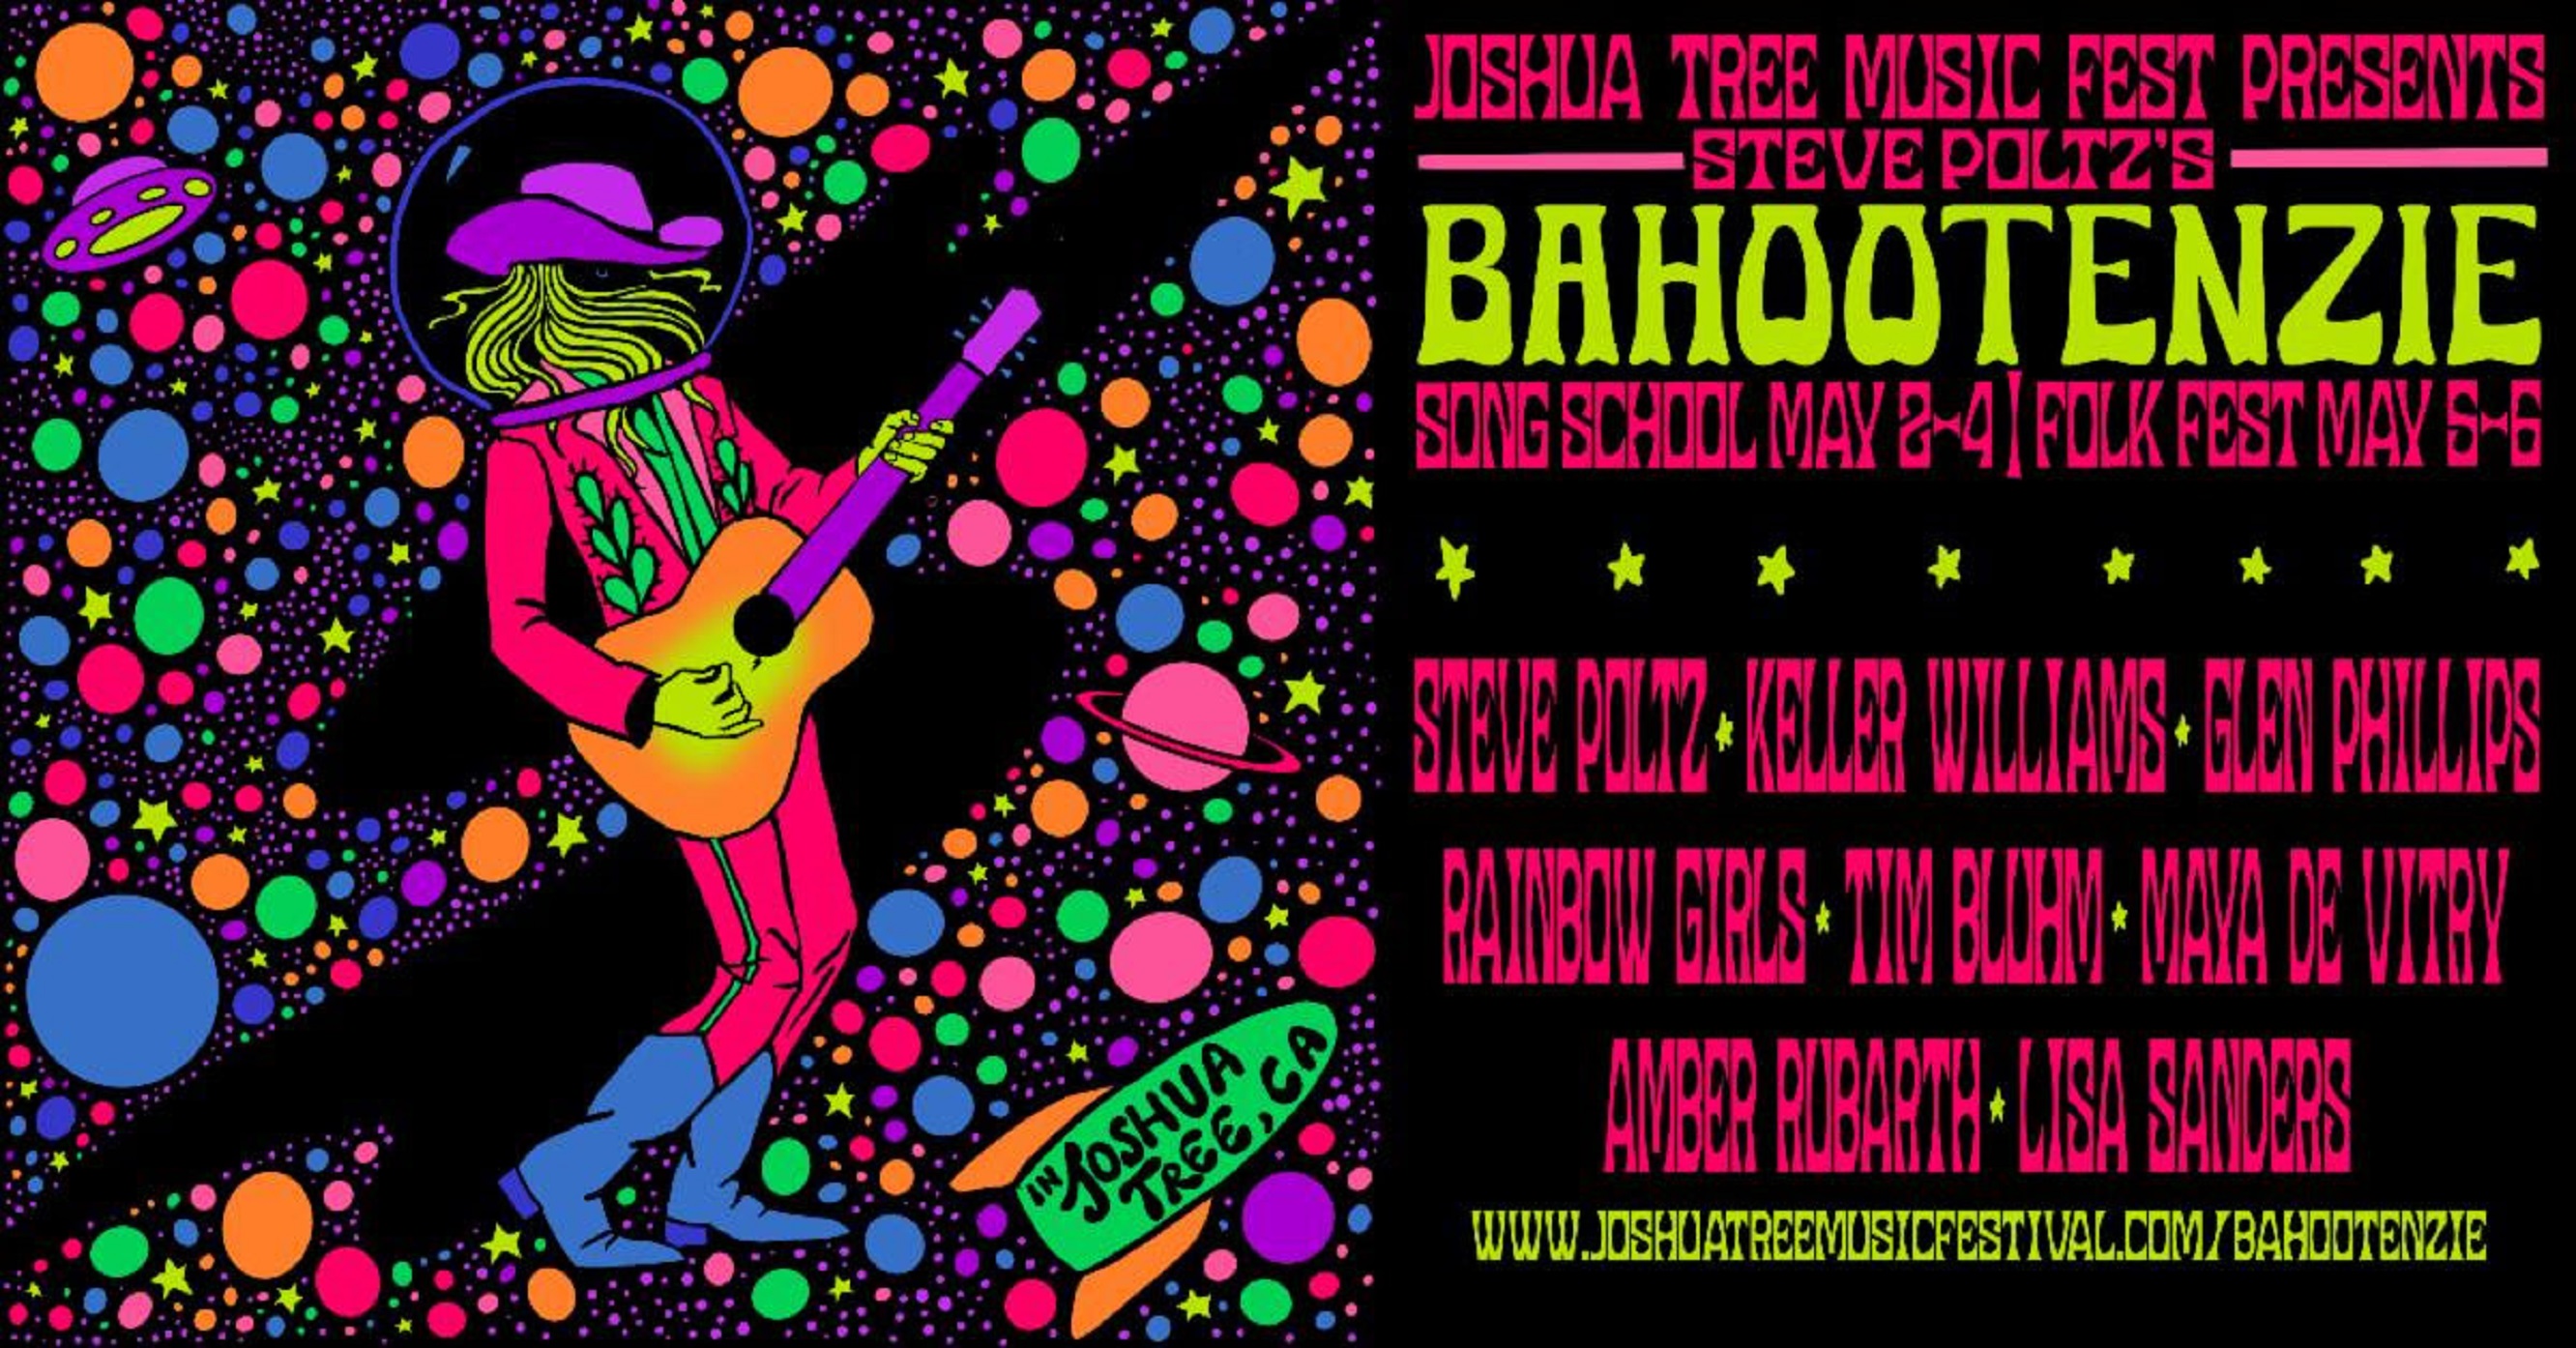 Steve Poltz returns with second annual "BaHOOTenzie!" song school and fest